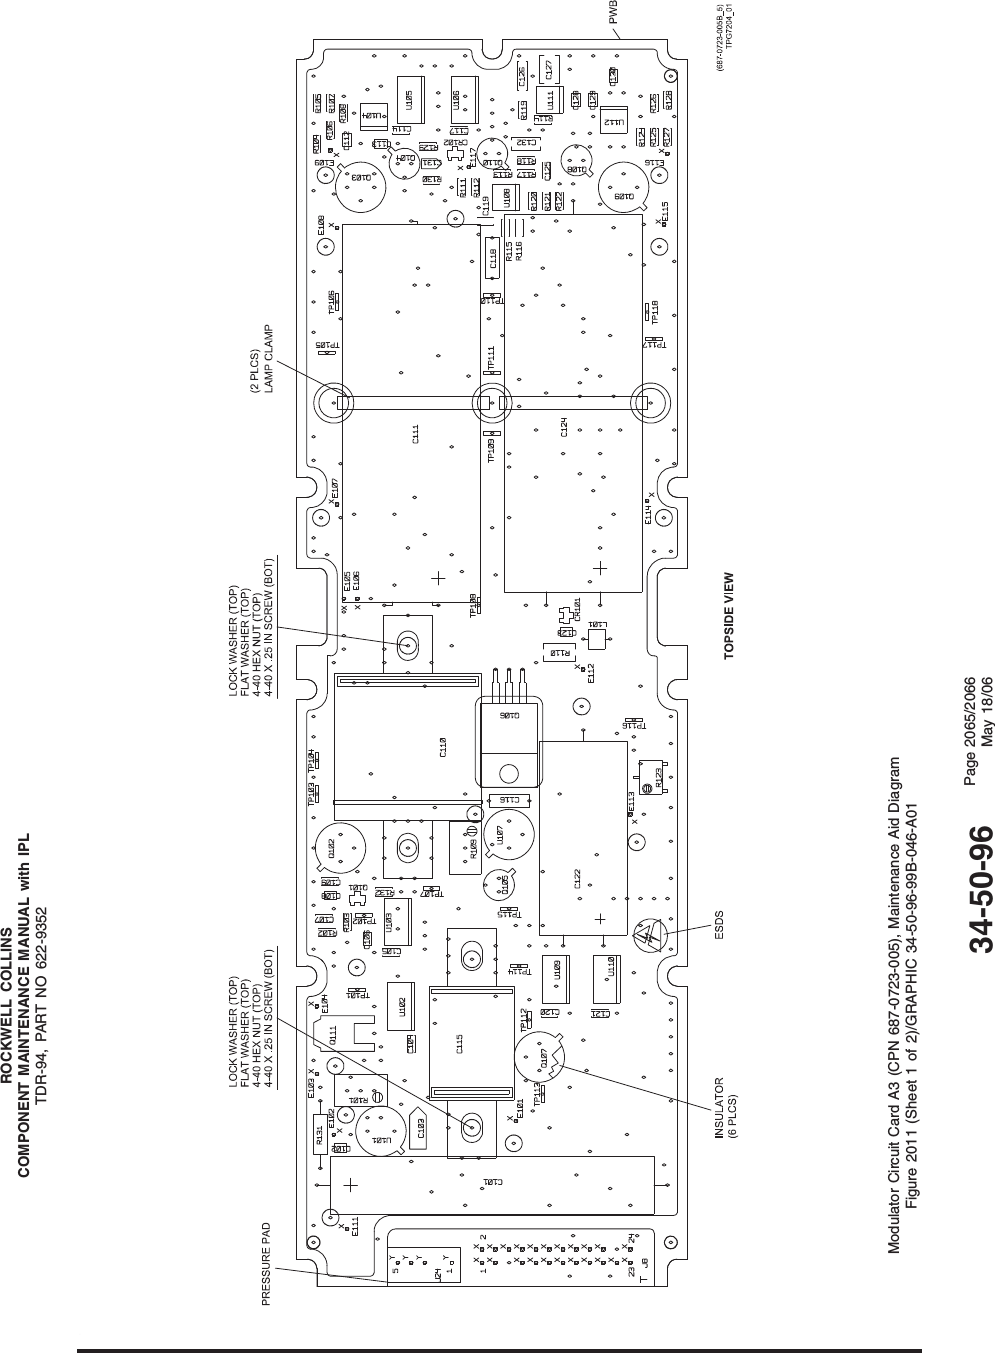 ROCKWELL COLLINSCOMPONENT MAINTENANCE MANUAL with IPLTDR-94, PART NO 622-9352Modulator Circuit Card A3 (CPN 687-0723-005), Maintenance Aid DiagramFigure 2011 (Sheet 1 of 2)/GRAPHIC 34-50-96-99B-046-A0134-50-96 Page 2065/2066May 18/06